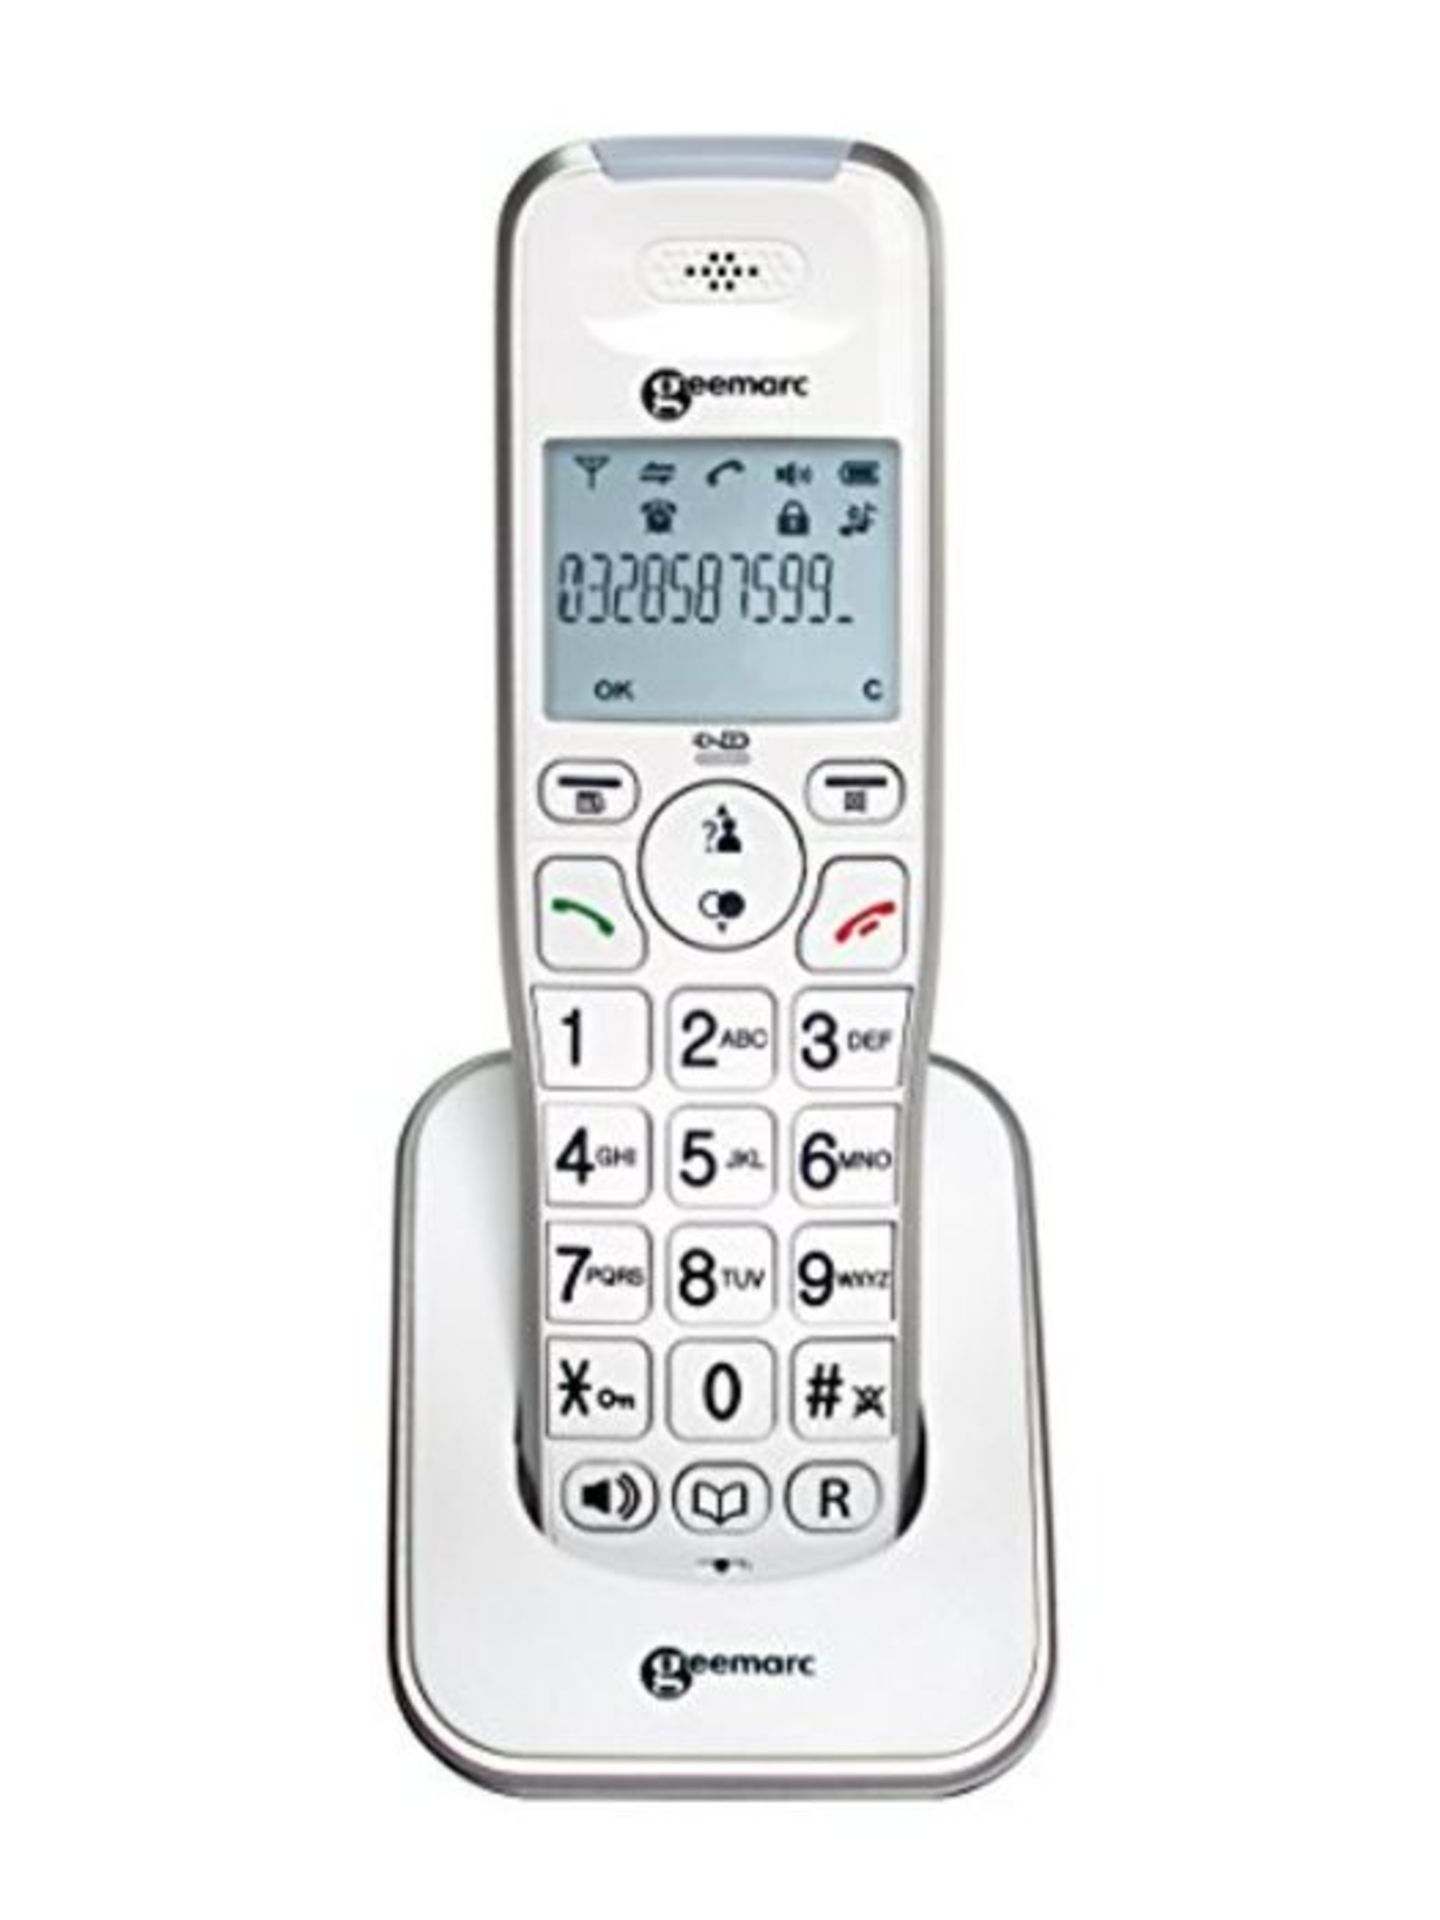 Geemarc Amplidect 295 HS - Additional Handset for Geemarc Amplidect 295 Range with Ext